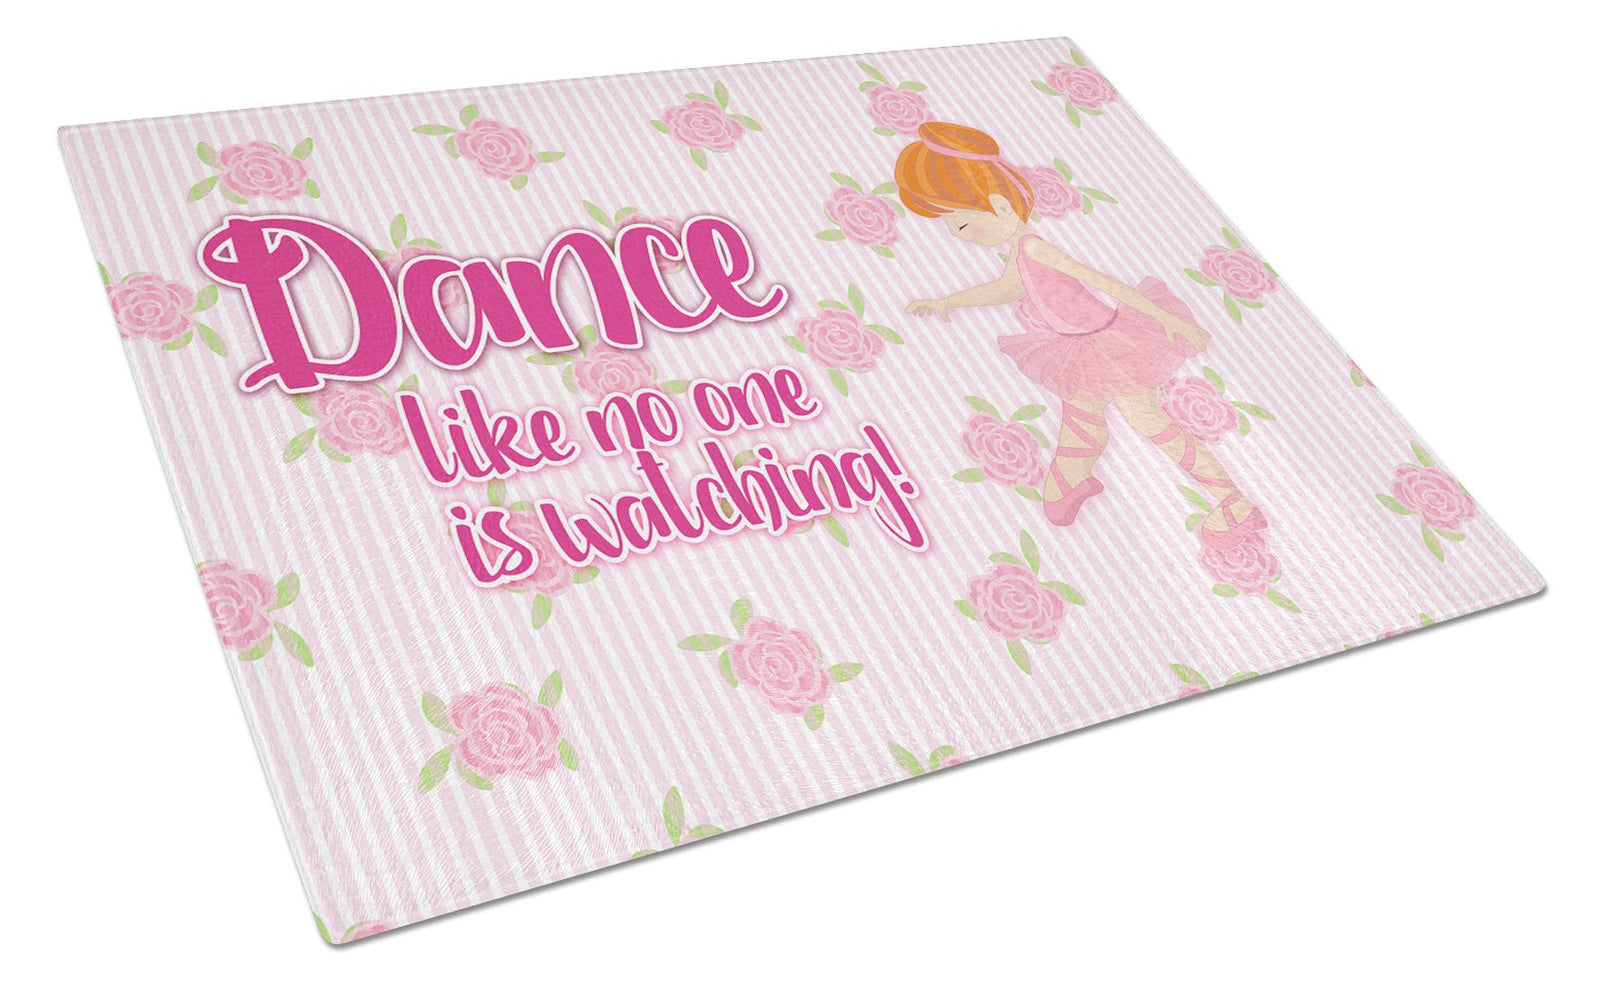 Ballet Dance Red Hair Glass Cutting Board Large BB5392LCB by Caroline's Treasures